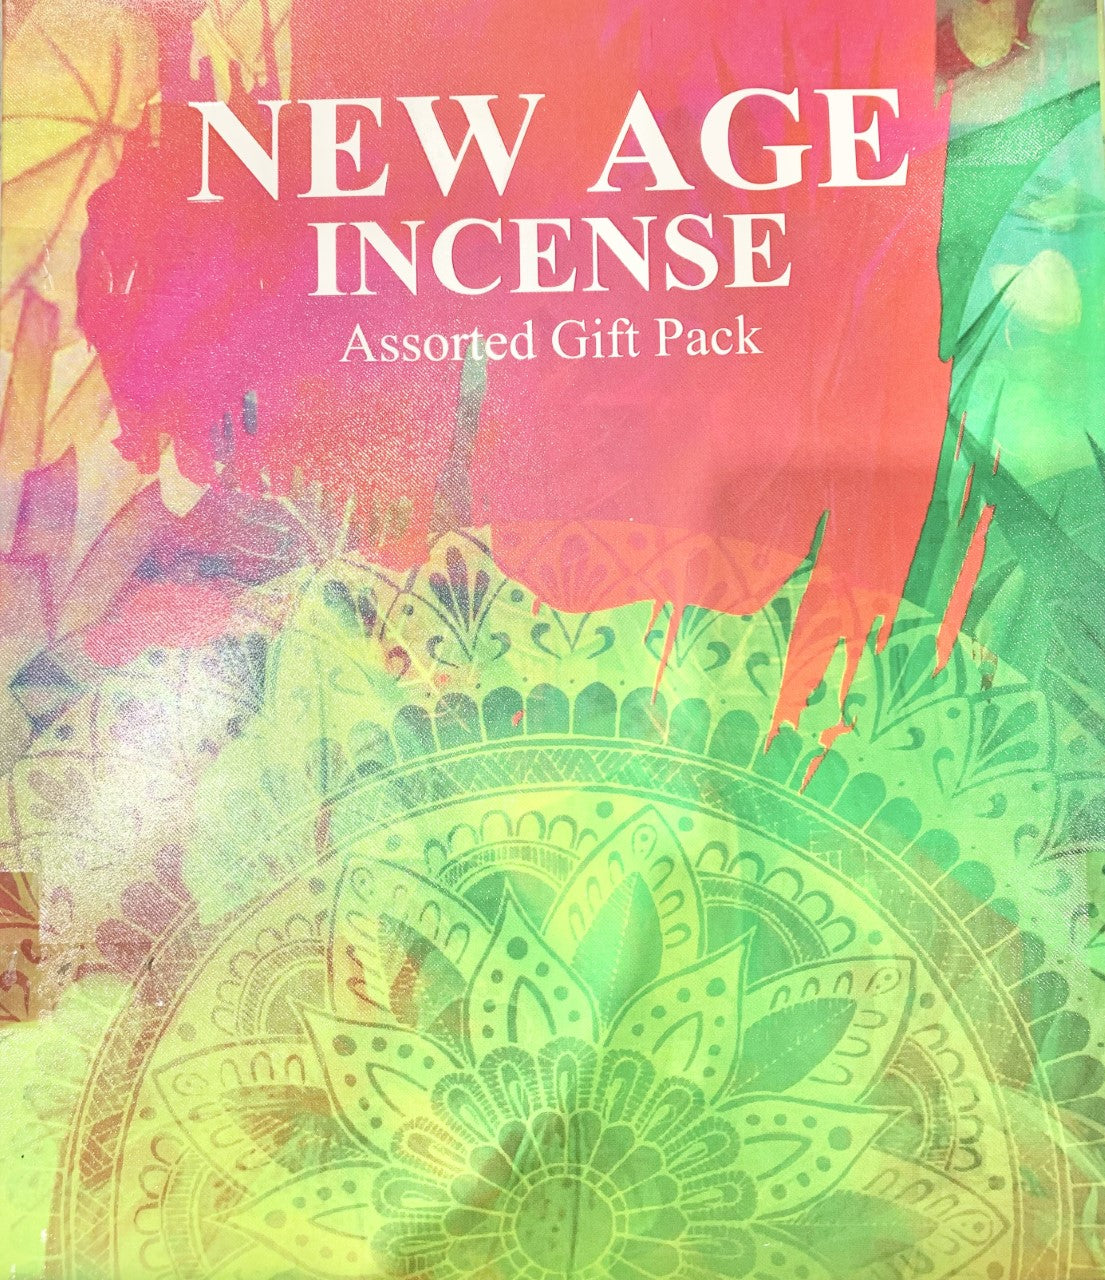 New Age Incense Assorted Gift Set